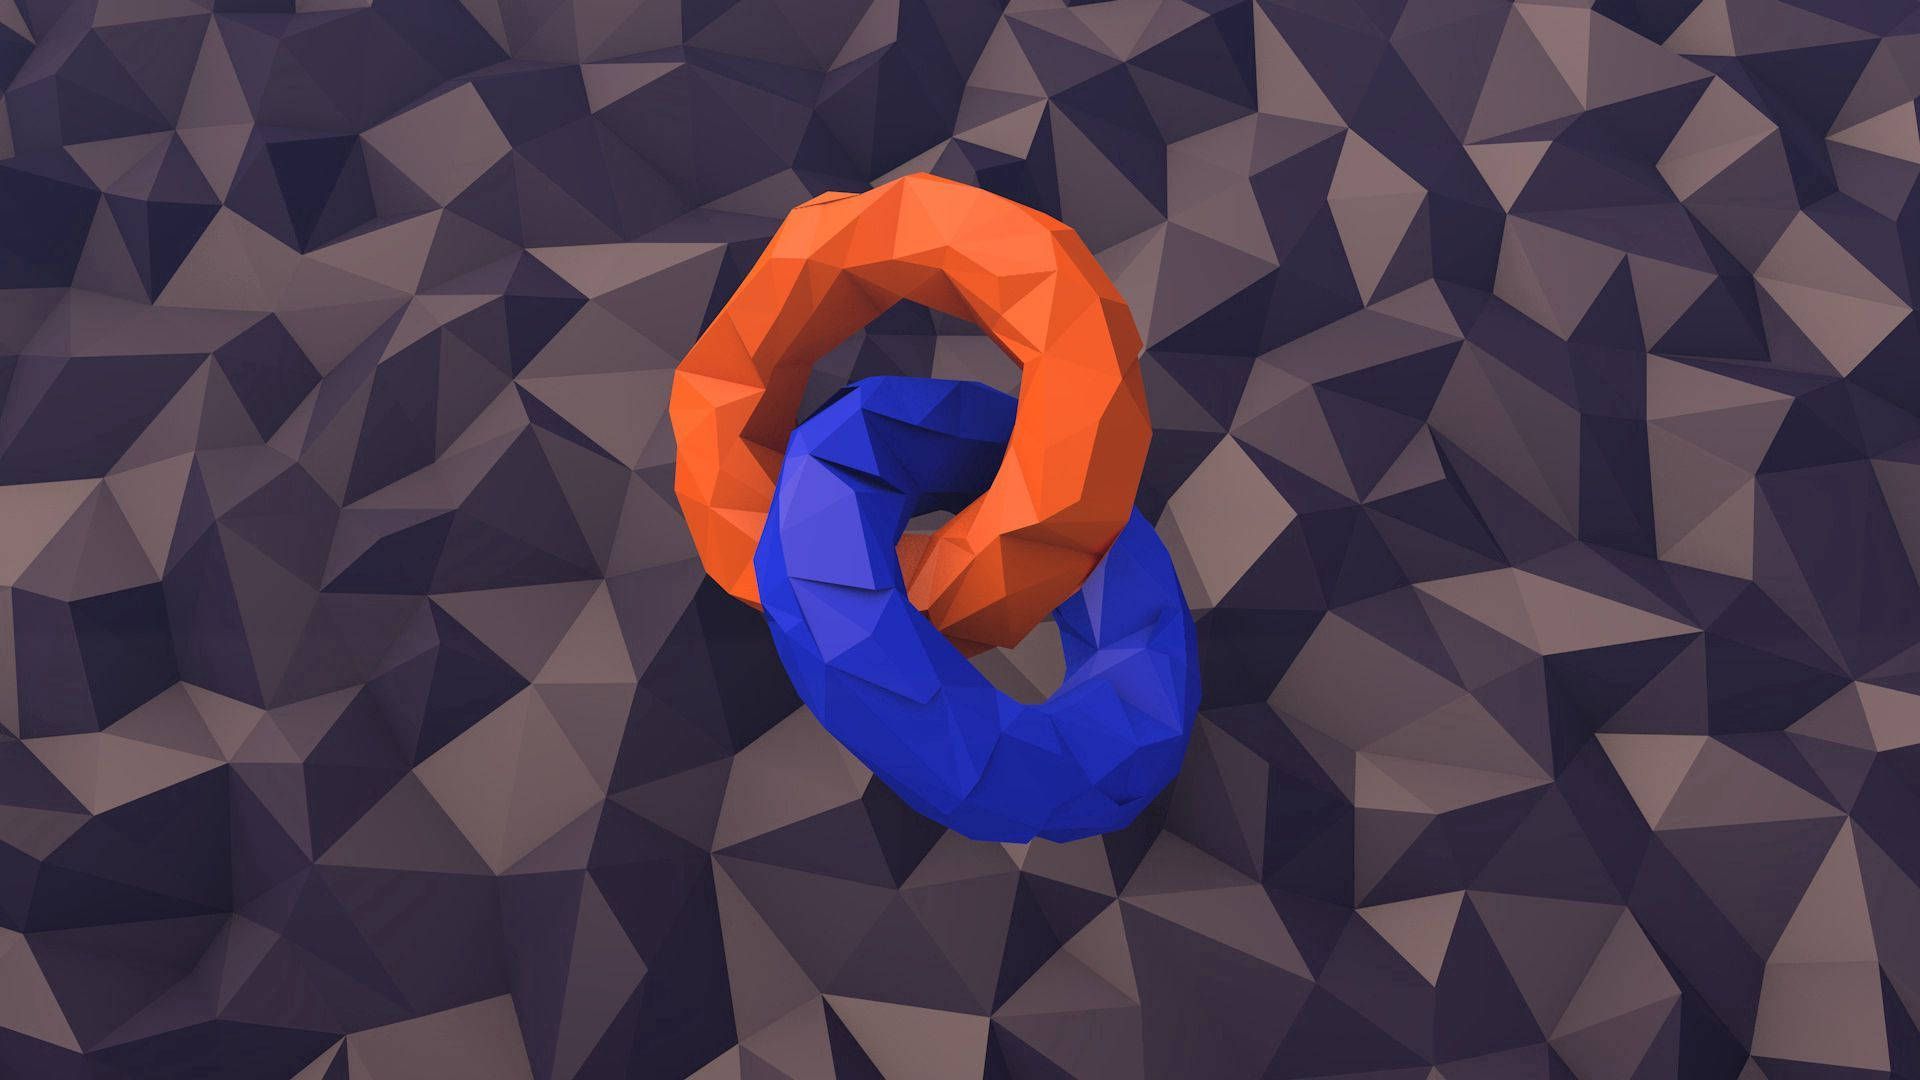 A low poly 3D render of a chain link symbol - Low poly